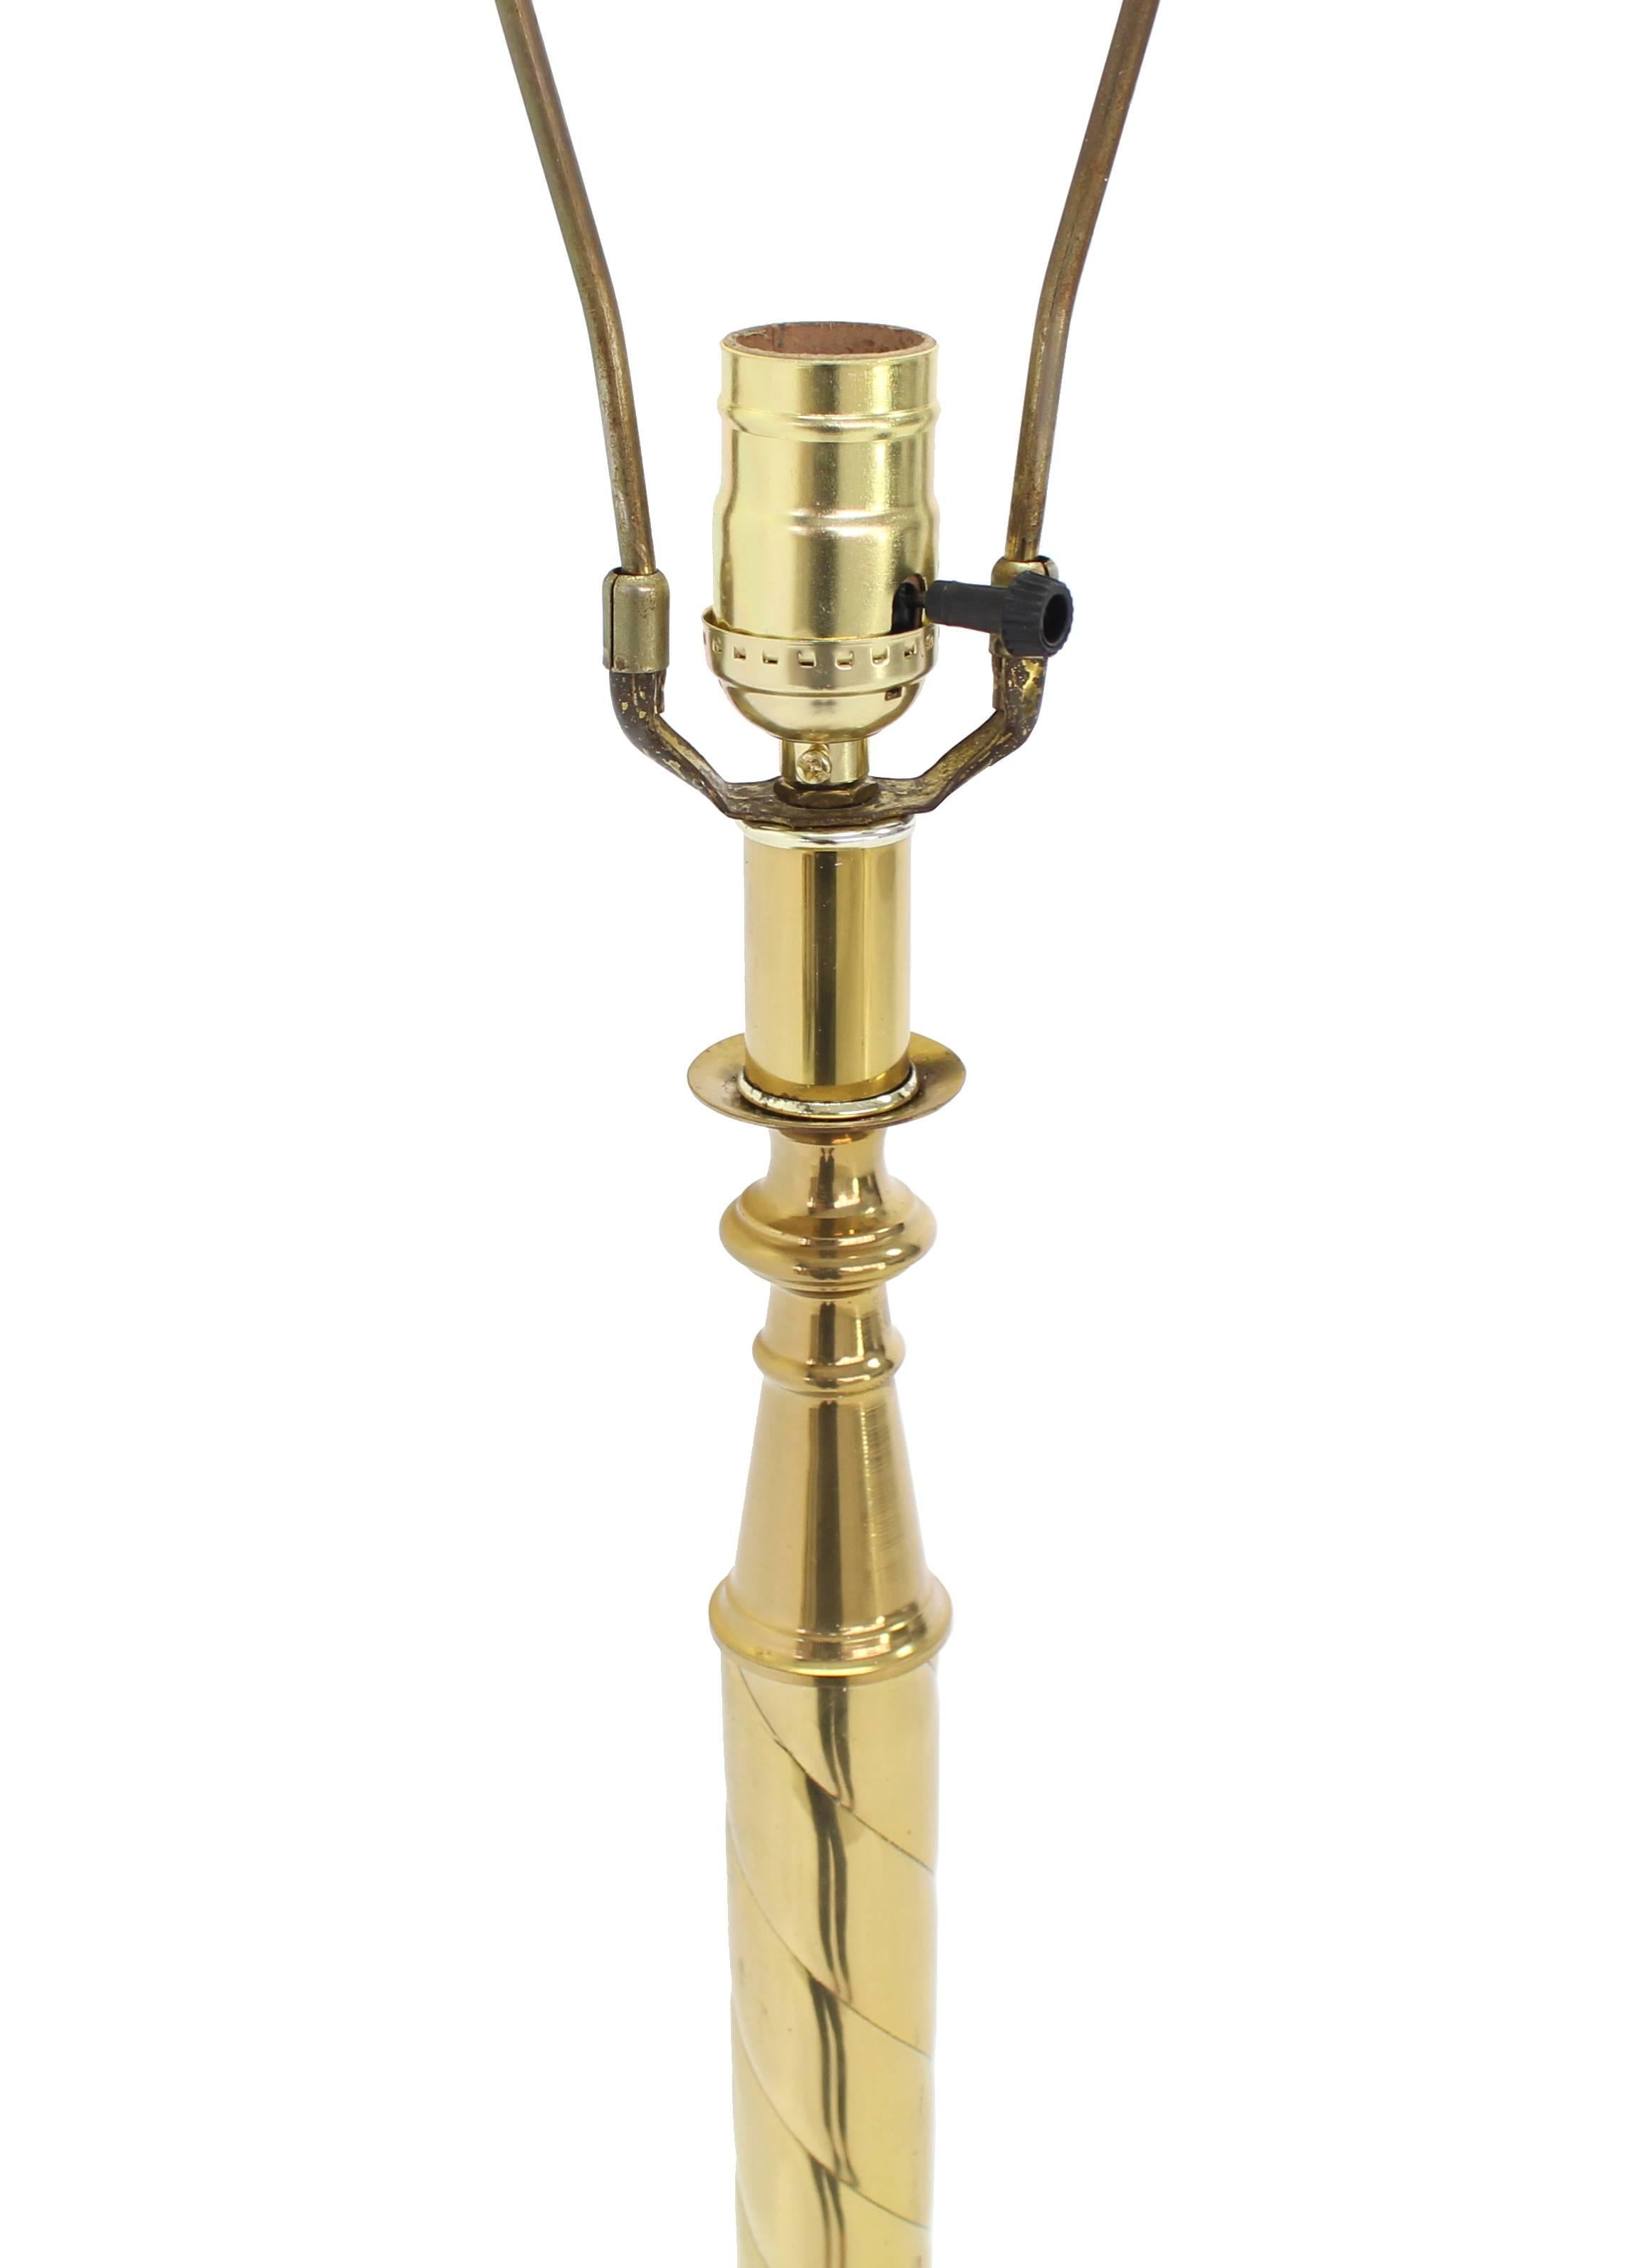 American Vintage Brass Floor Lamp with Decorative Glass Beads Shade For Sale